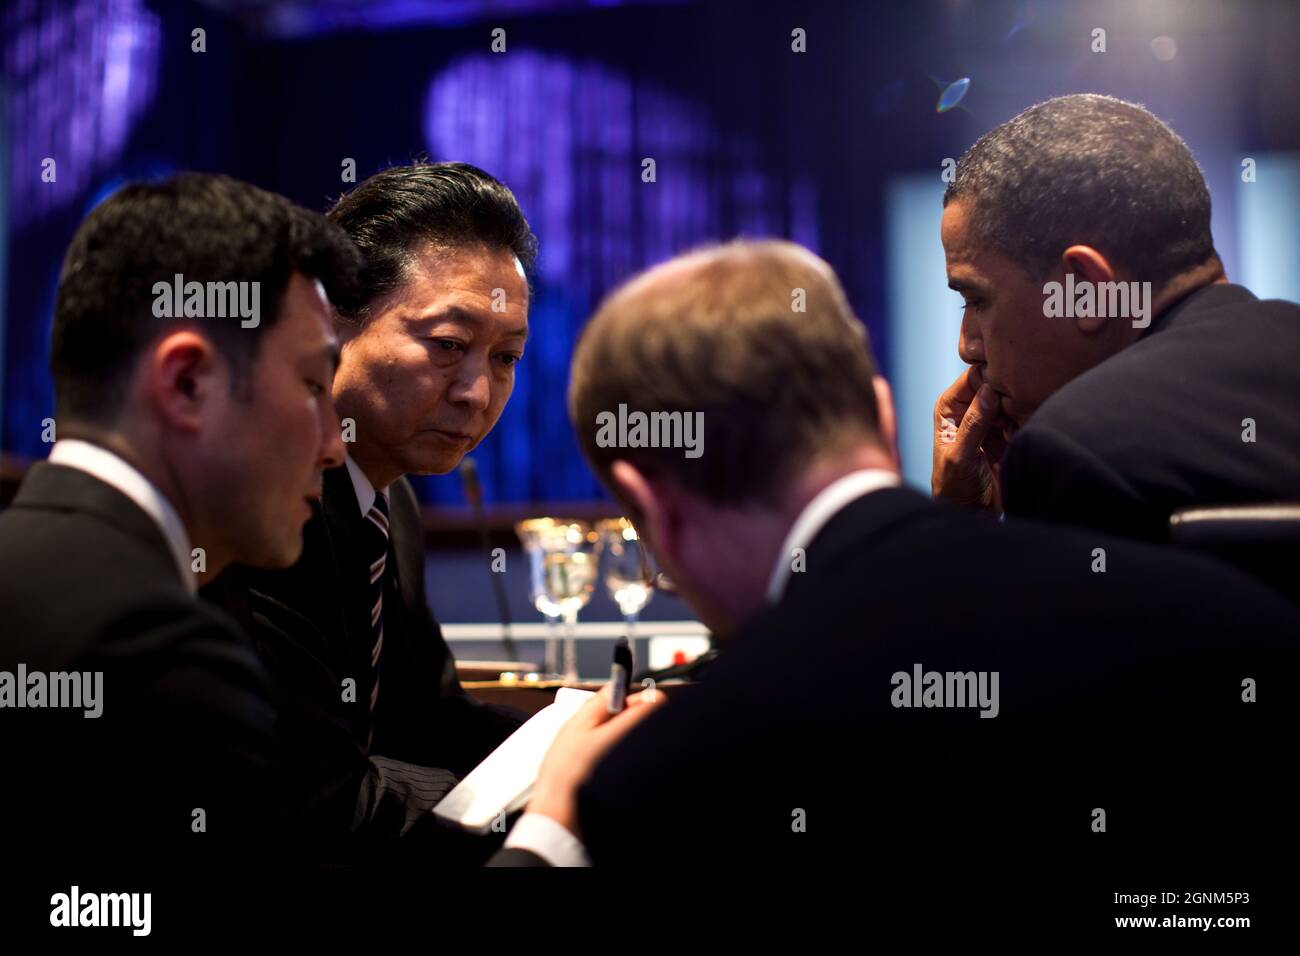 President Barack Obama talks with Prime Minister Yukio Hatoyama of Japan, during a working dinner for Heads of Delegation at the Nuclear Security Summit at the Walter E. Washington Convention Center in Washington, D.C., April 12, 2010. (Official White House Photo by Pete Souza) This official White House photograph is being made available only for publication by news organizations and/or for personal use printing by the subject(s) of the photograph. The photograph may not be manipulated in any way and may not be used in commercial or political materials, advertisements, emails, products, promot Stock Photo